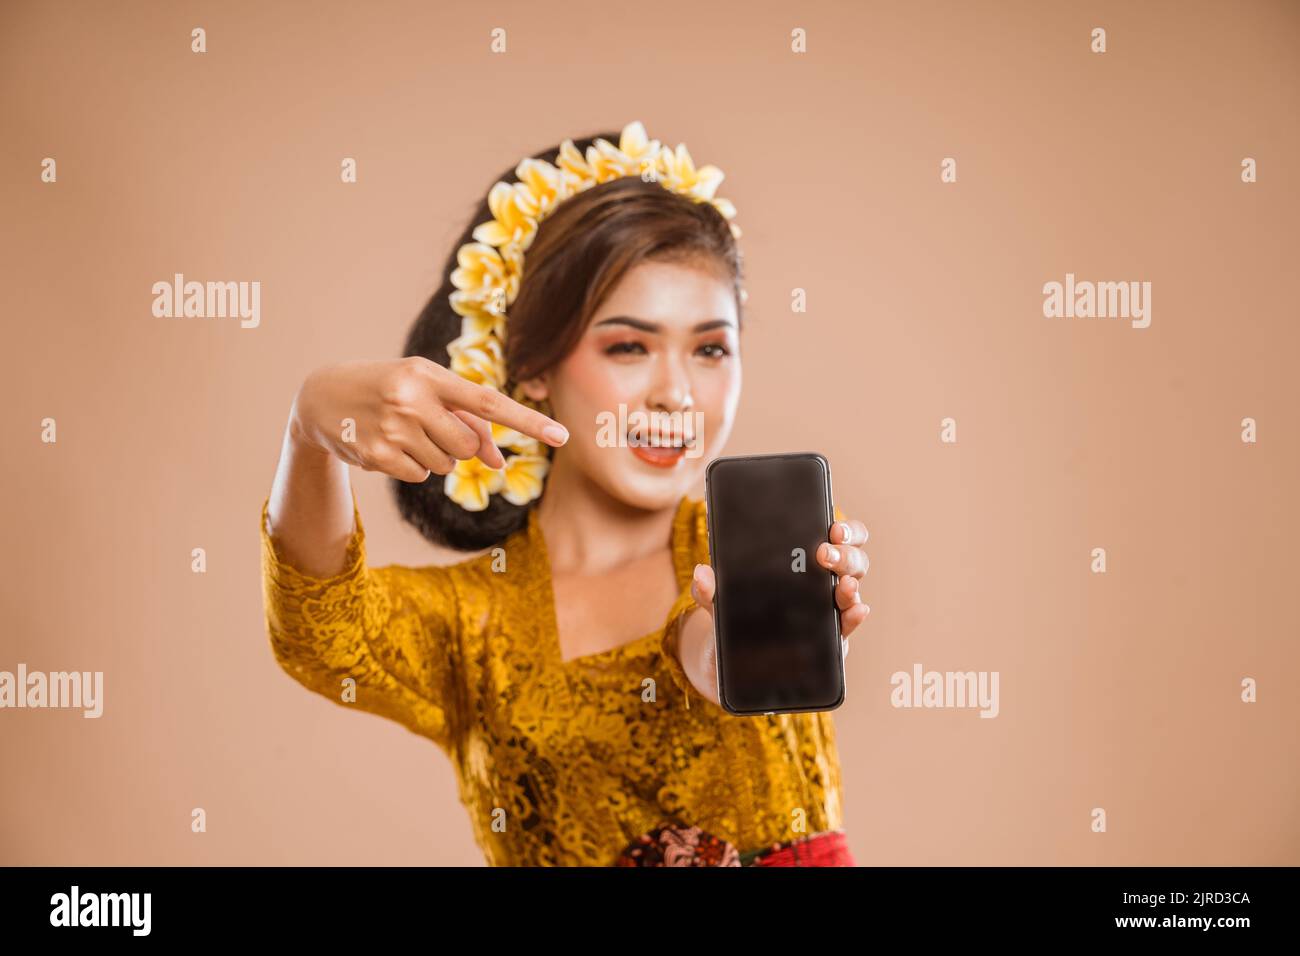 balinese woman with kebaya showing her mobile phone screen to camera Stock Photo